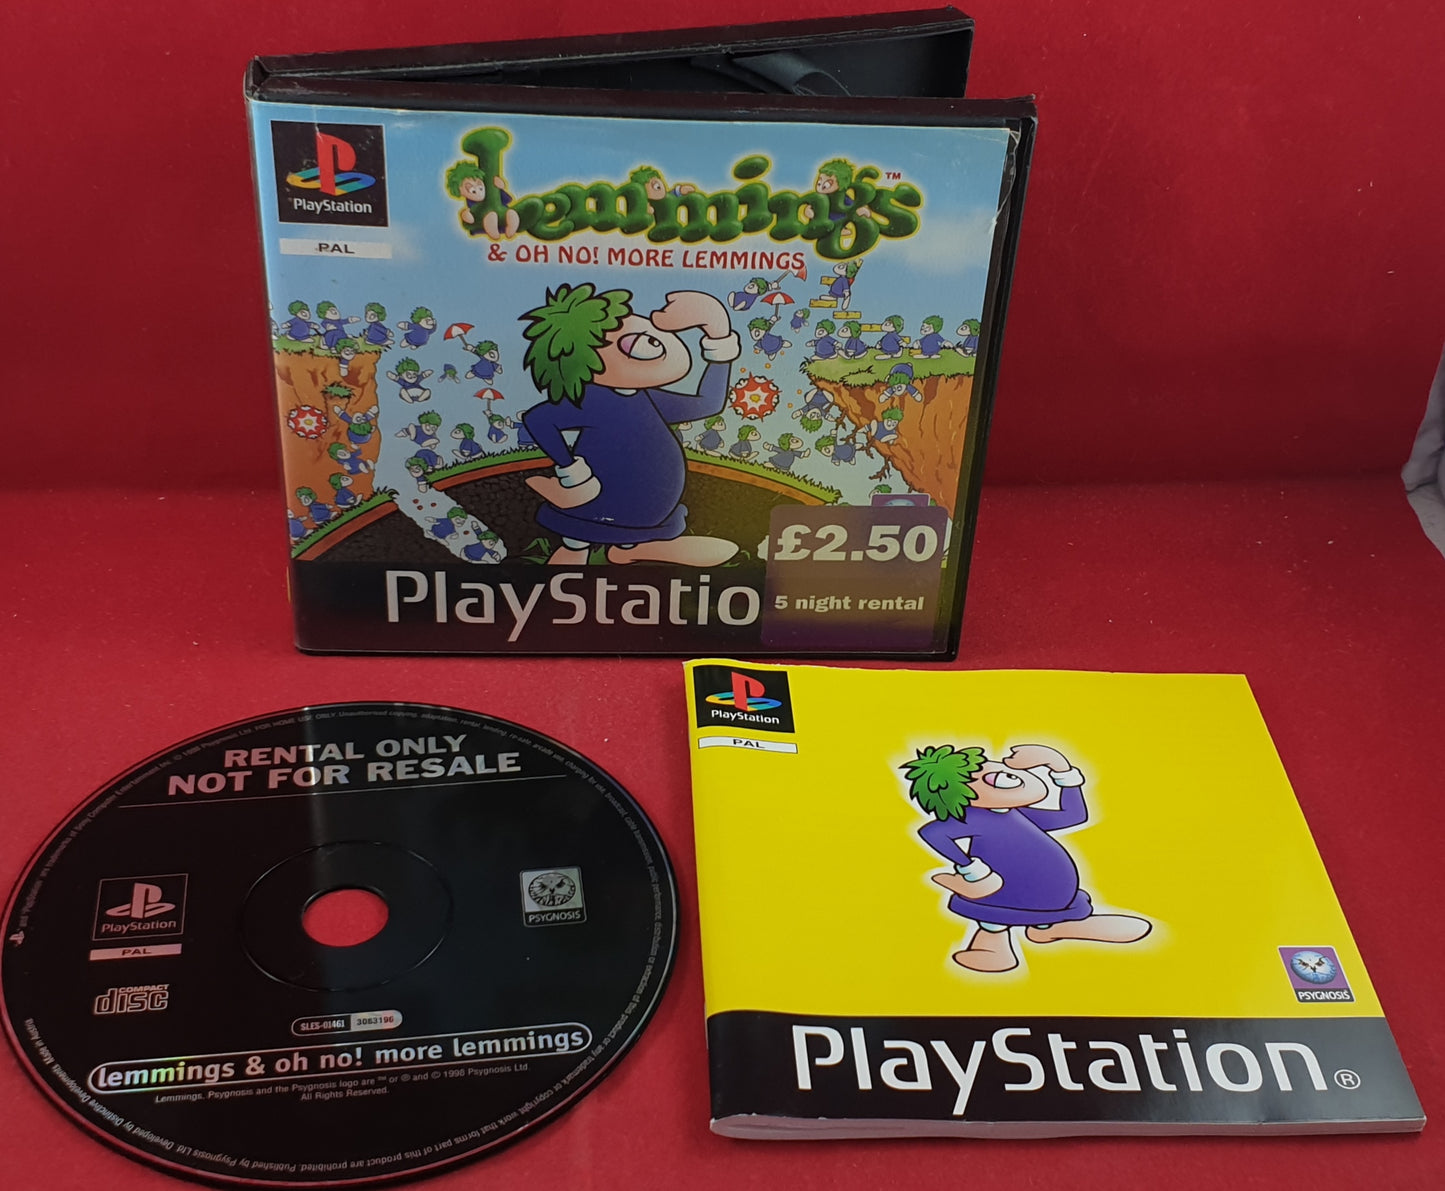 Lemmings & Oh No! More Lemmings in RARE Ex Rental Case Sony Playstation 1 (PS1) Game